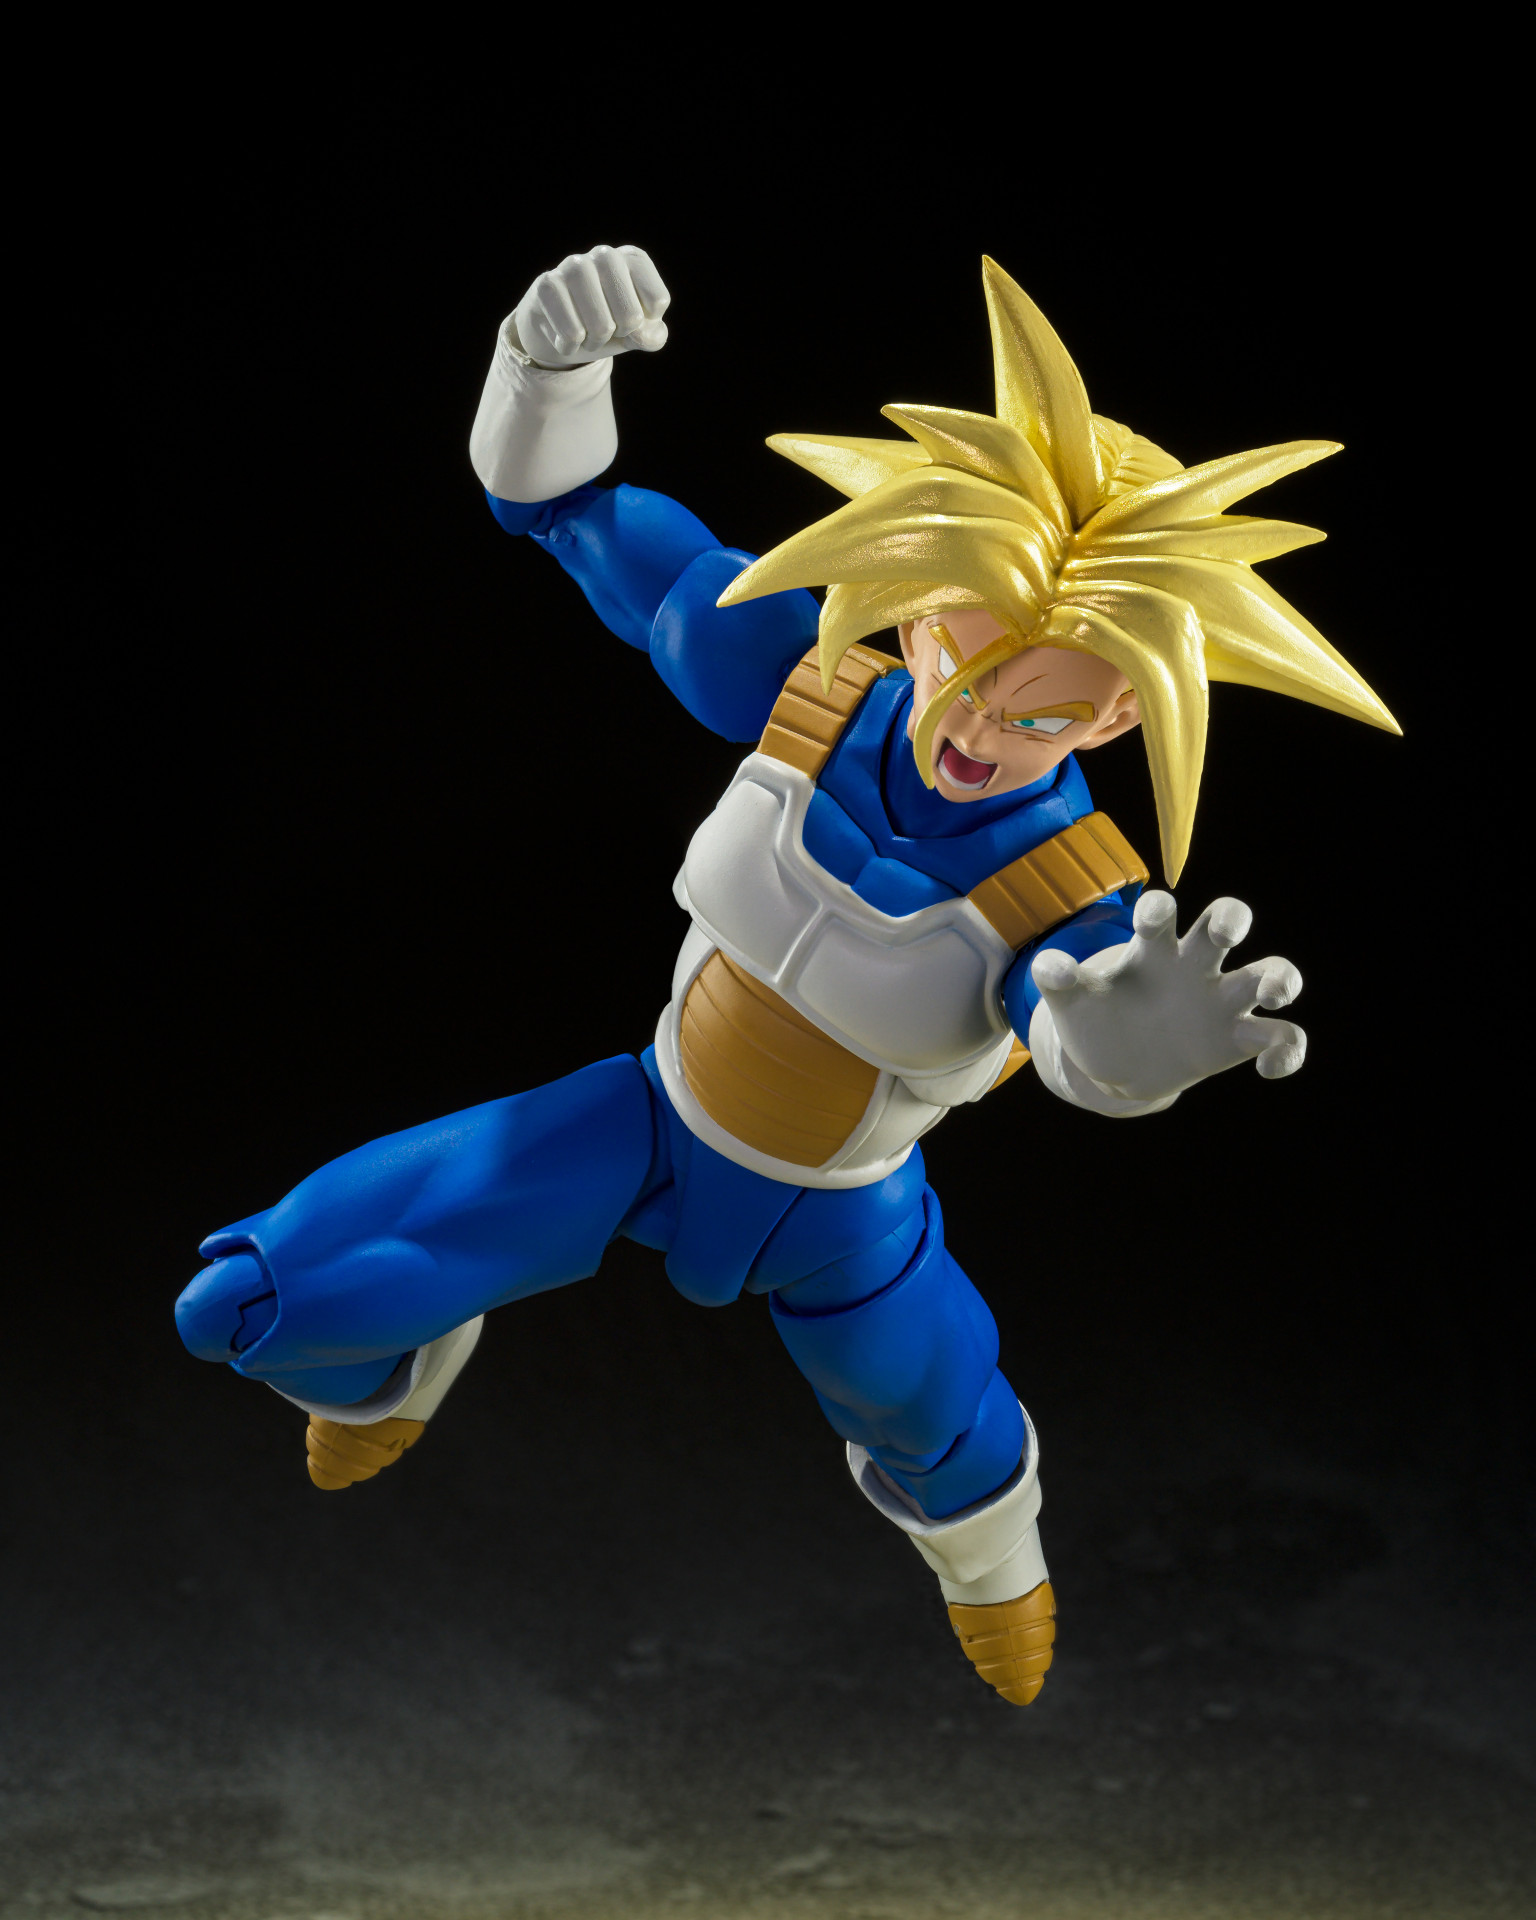 New Trunks Figure Coming to the S.H.Figuarts Series! Exhibit Open from  April 4th in Akihabara!]